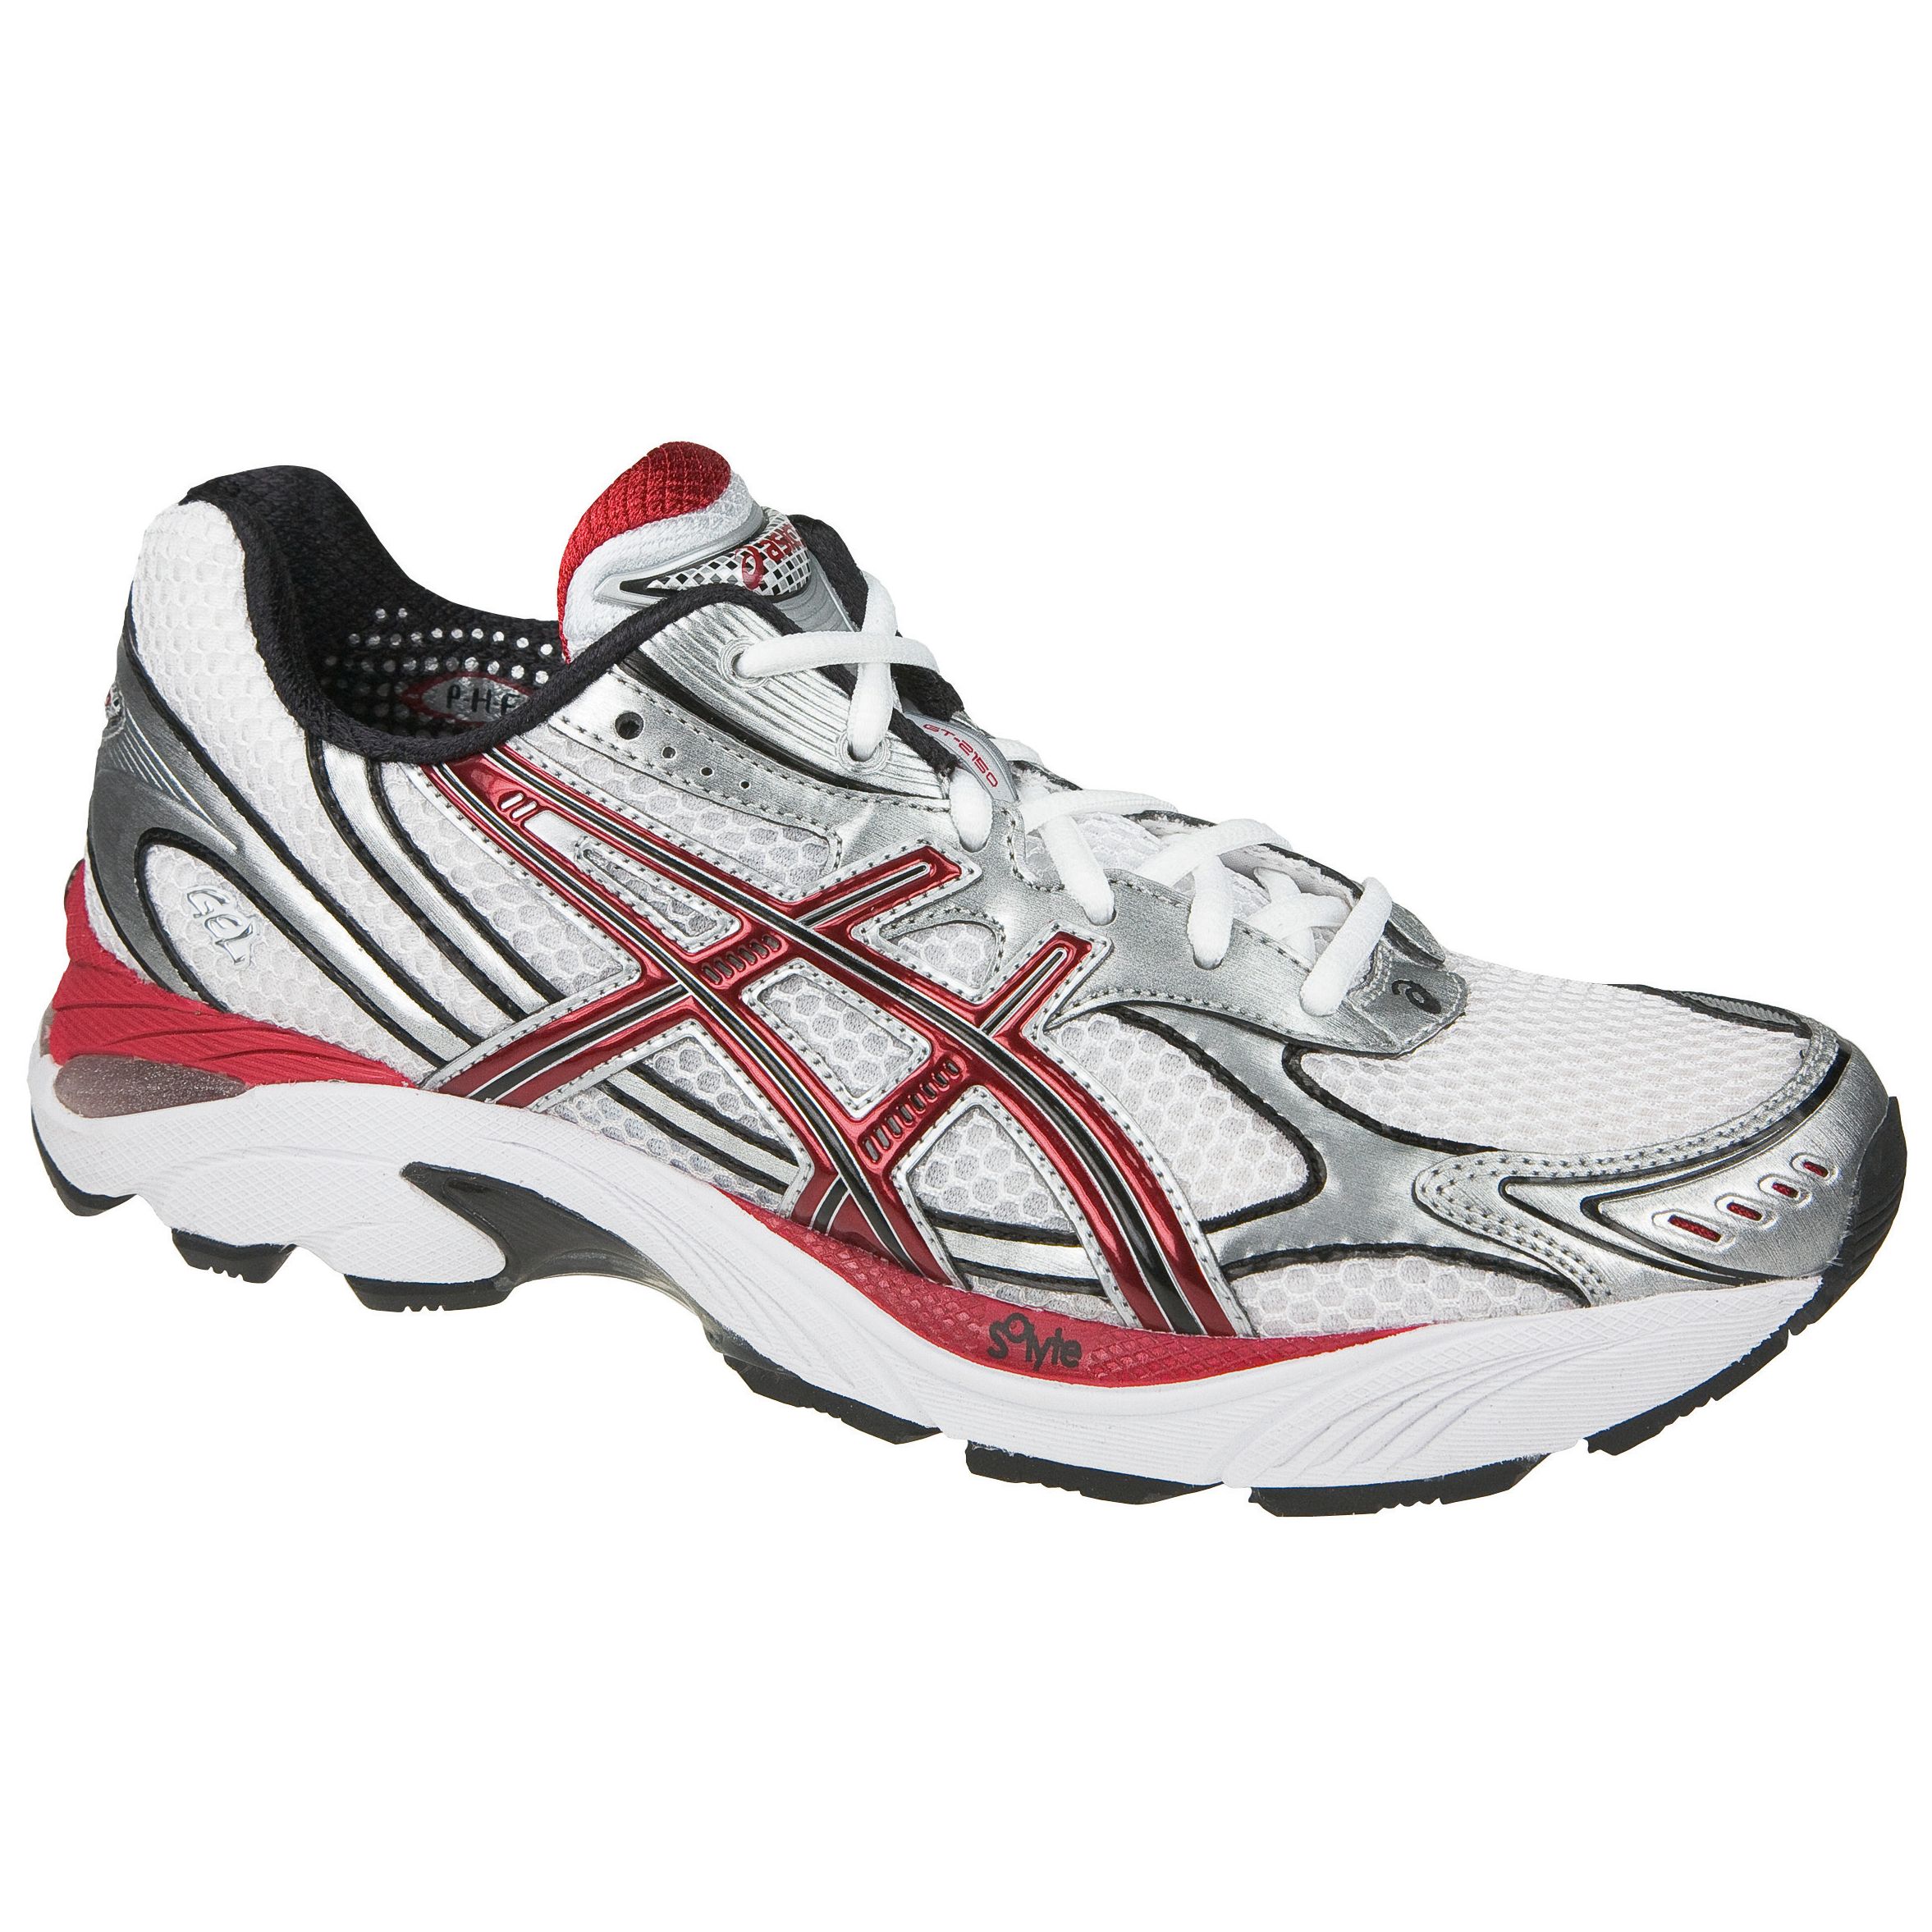 Asics GT2150 Running Shoes, White/red, 10.5